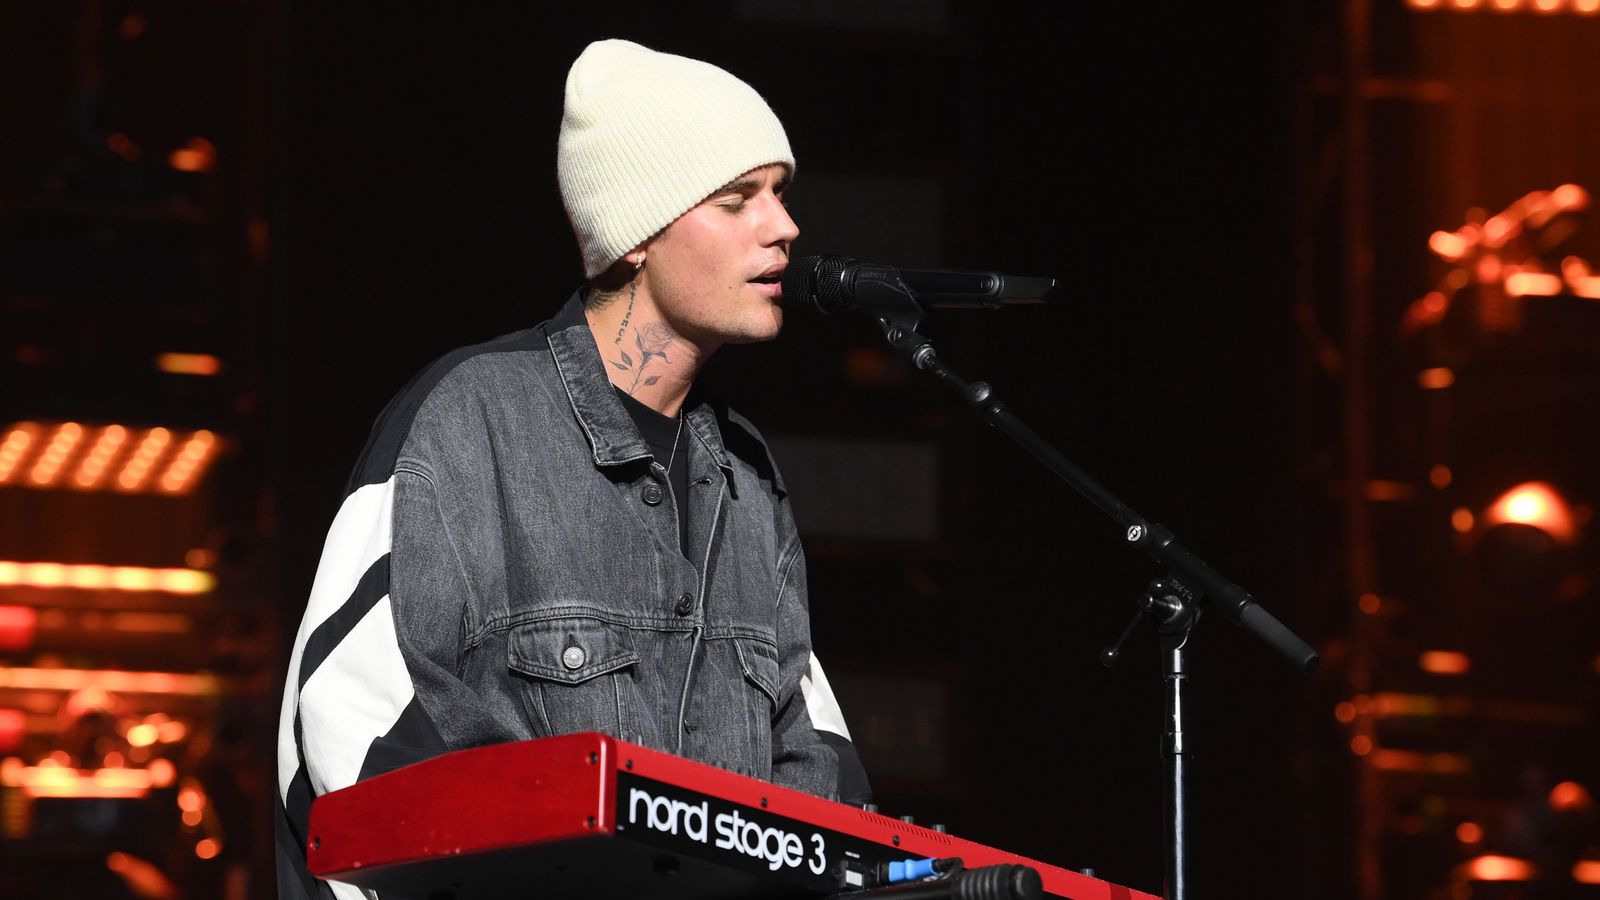 Justin Bieber selling his back catalogue is eyebrow-raising